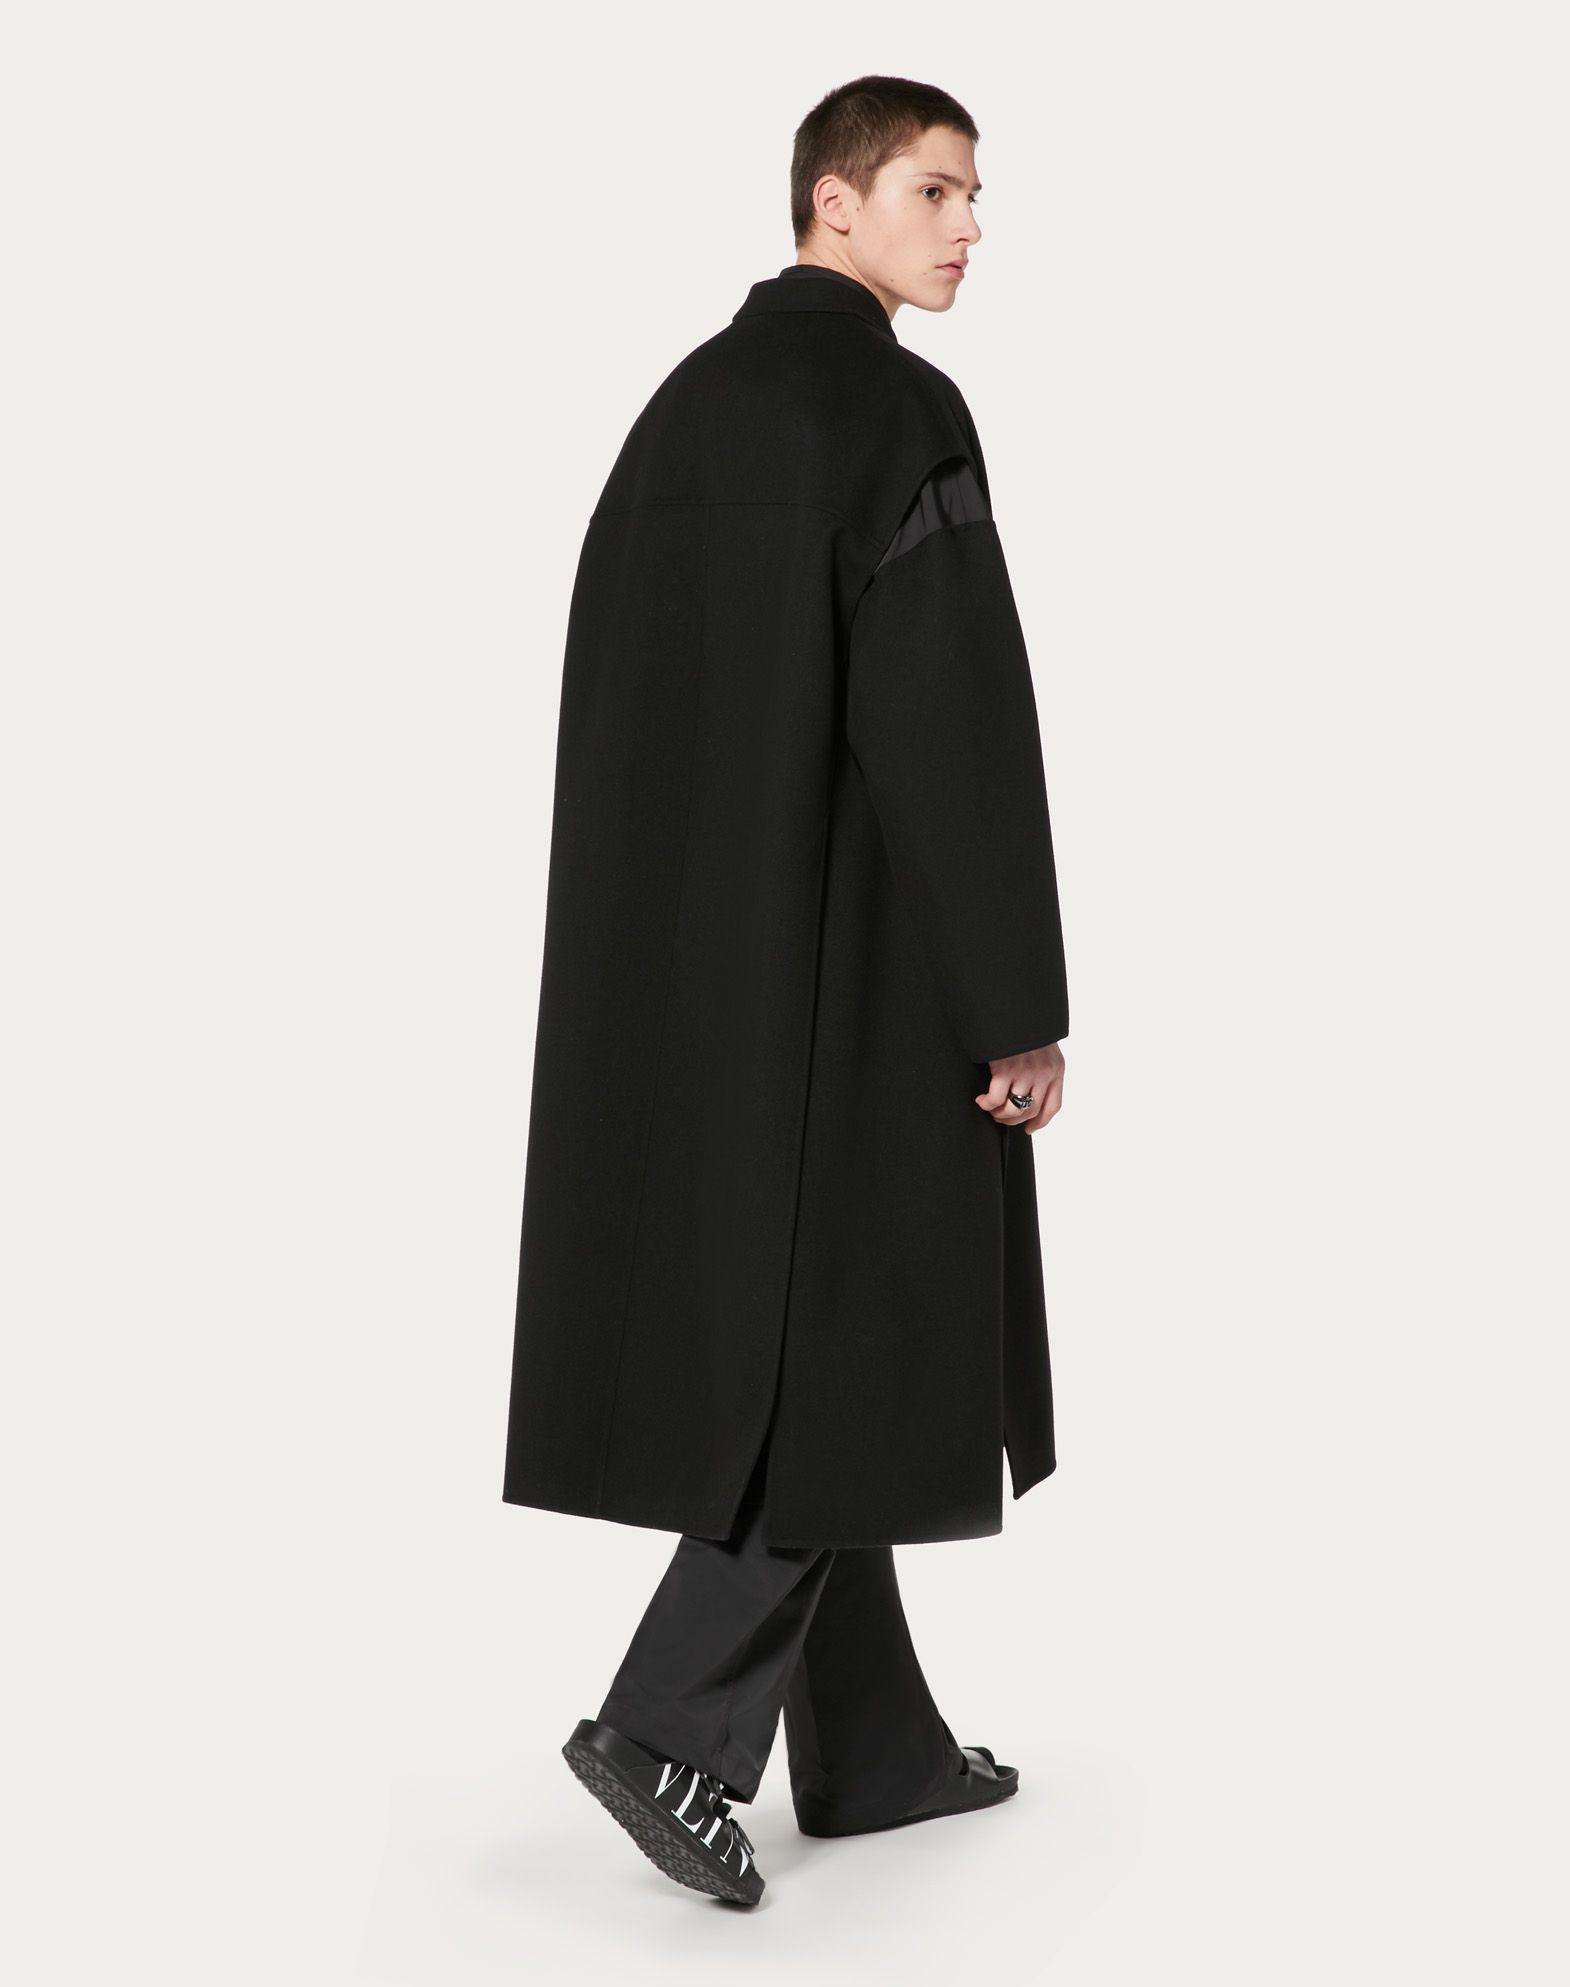 Valentino Two-layer Wool & Cashmere Coat in Black for Men - Lyst